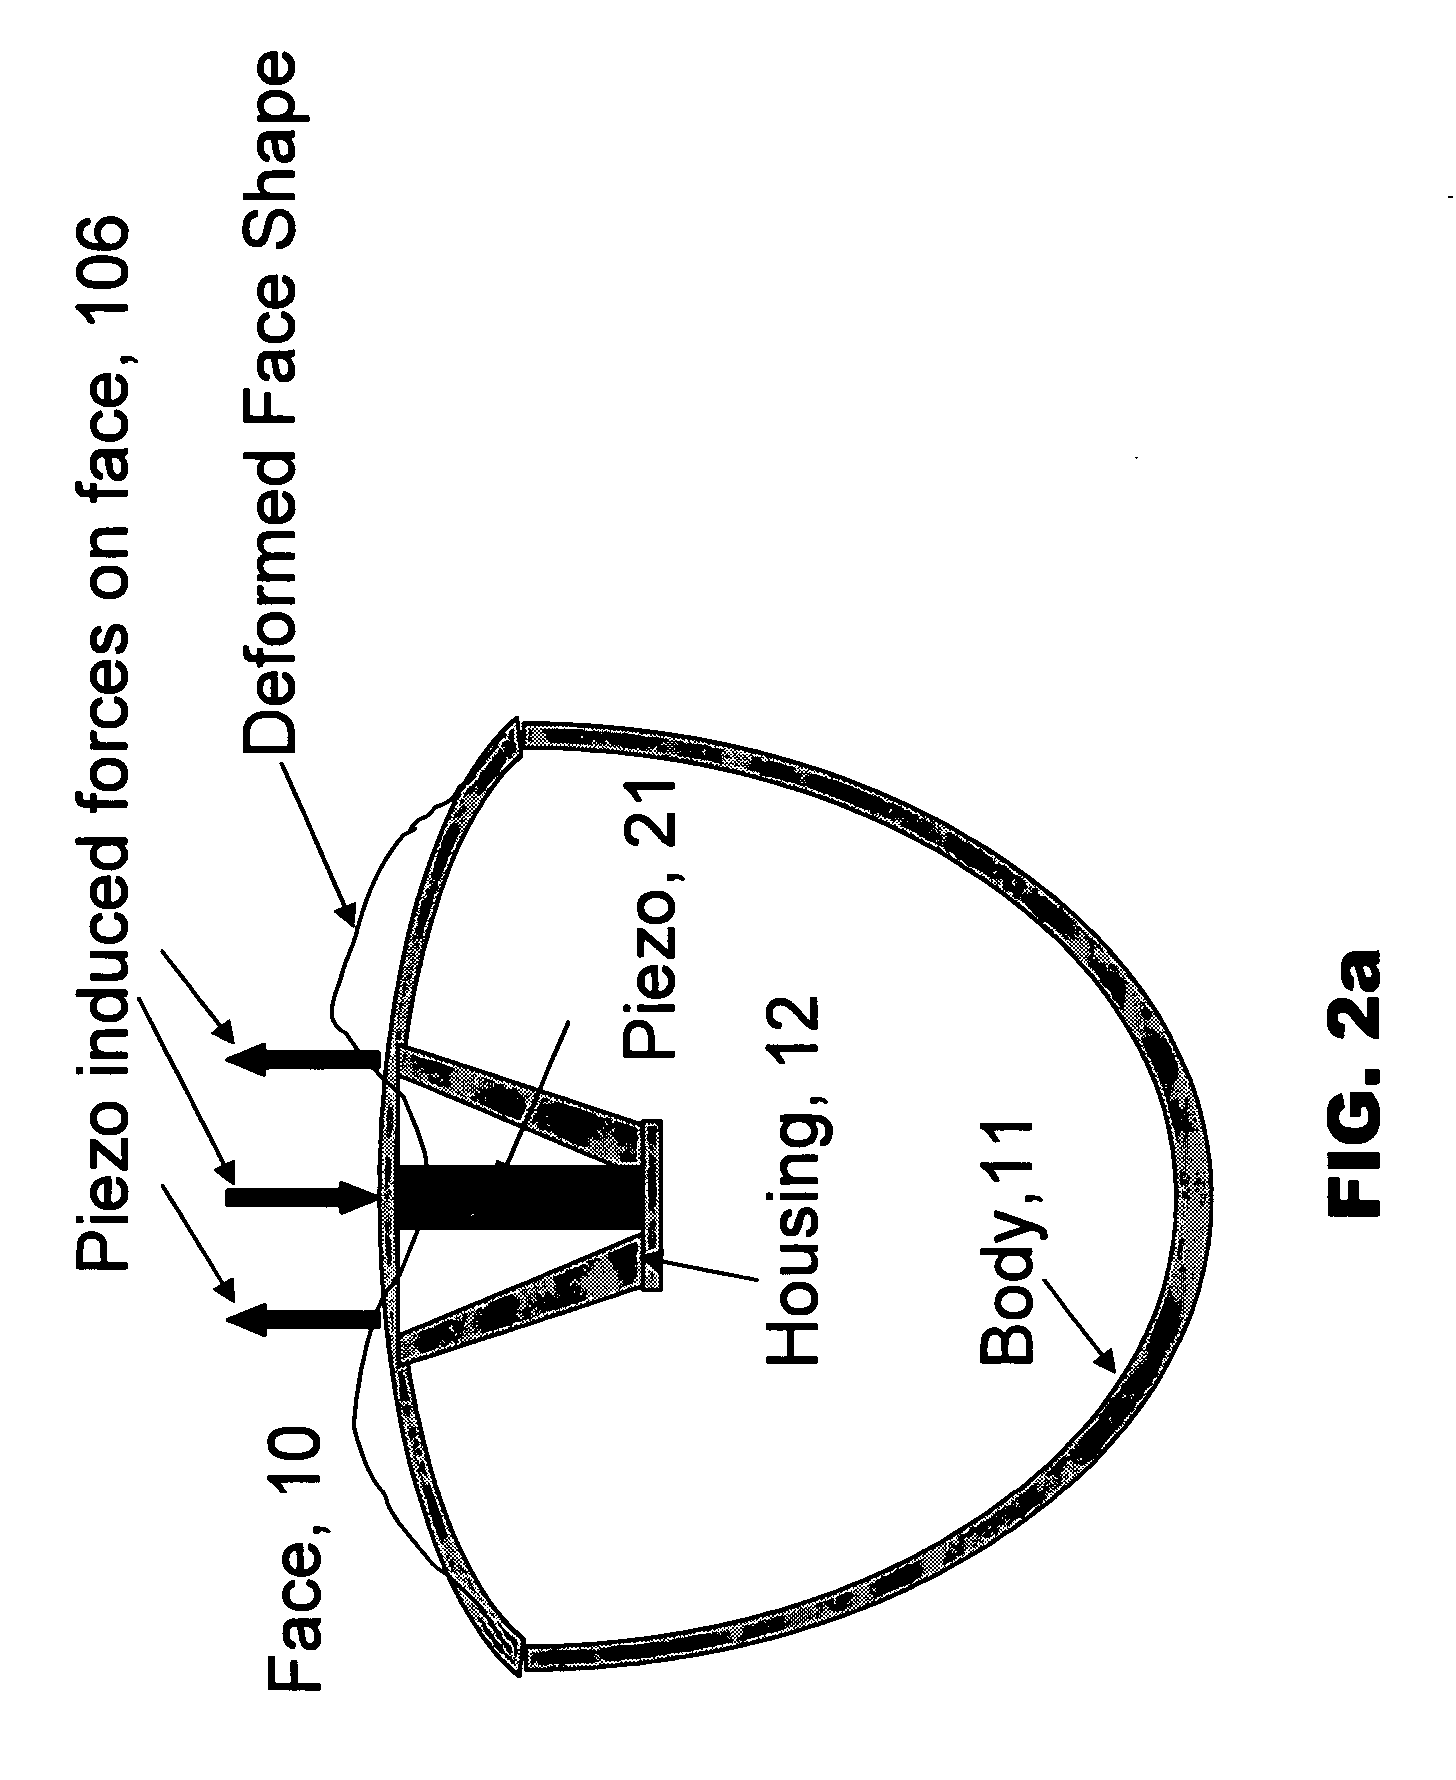 Method and apparatus for active control of golf club impact